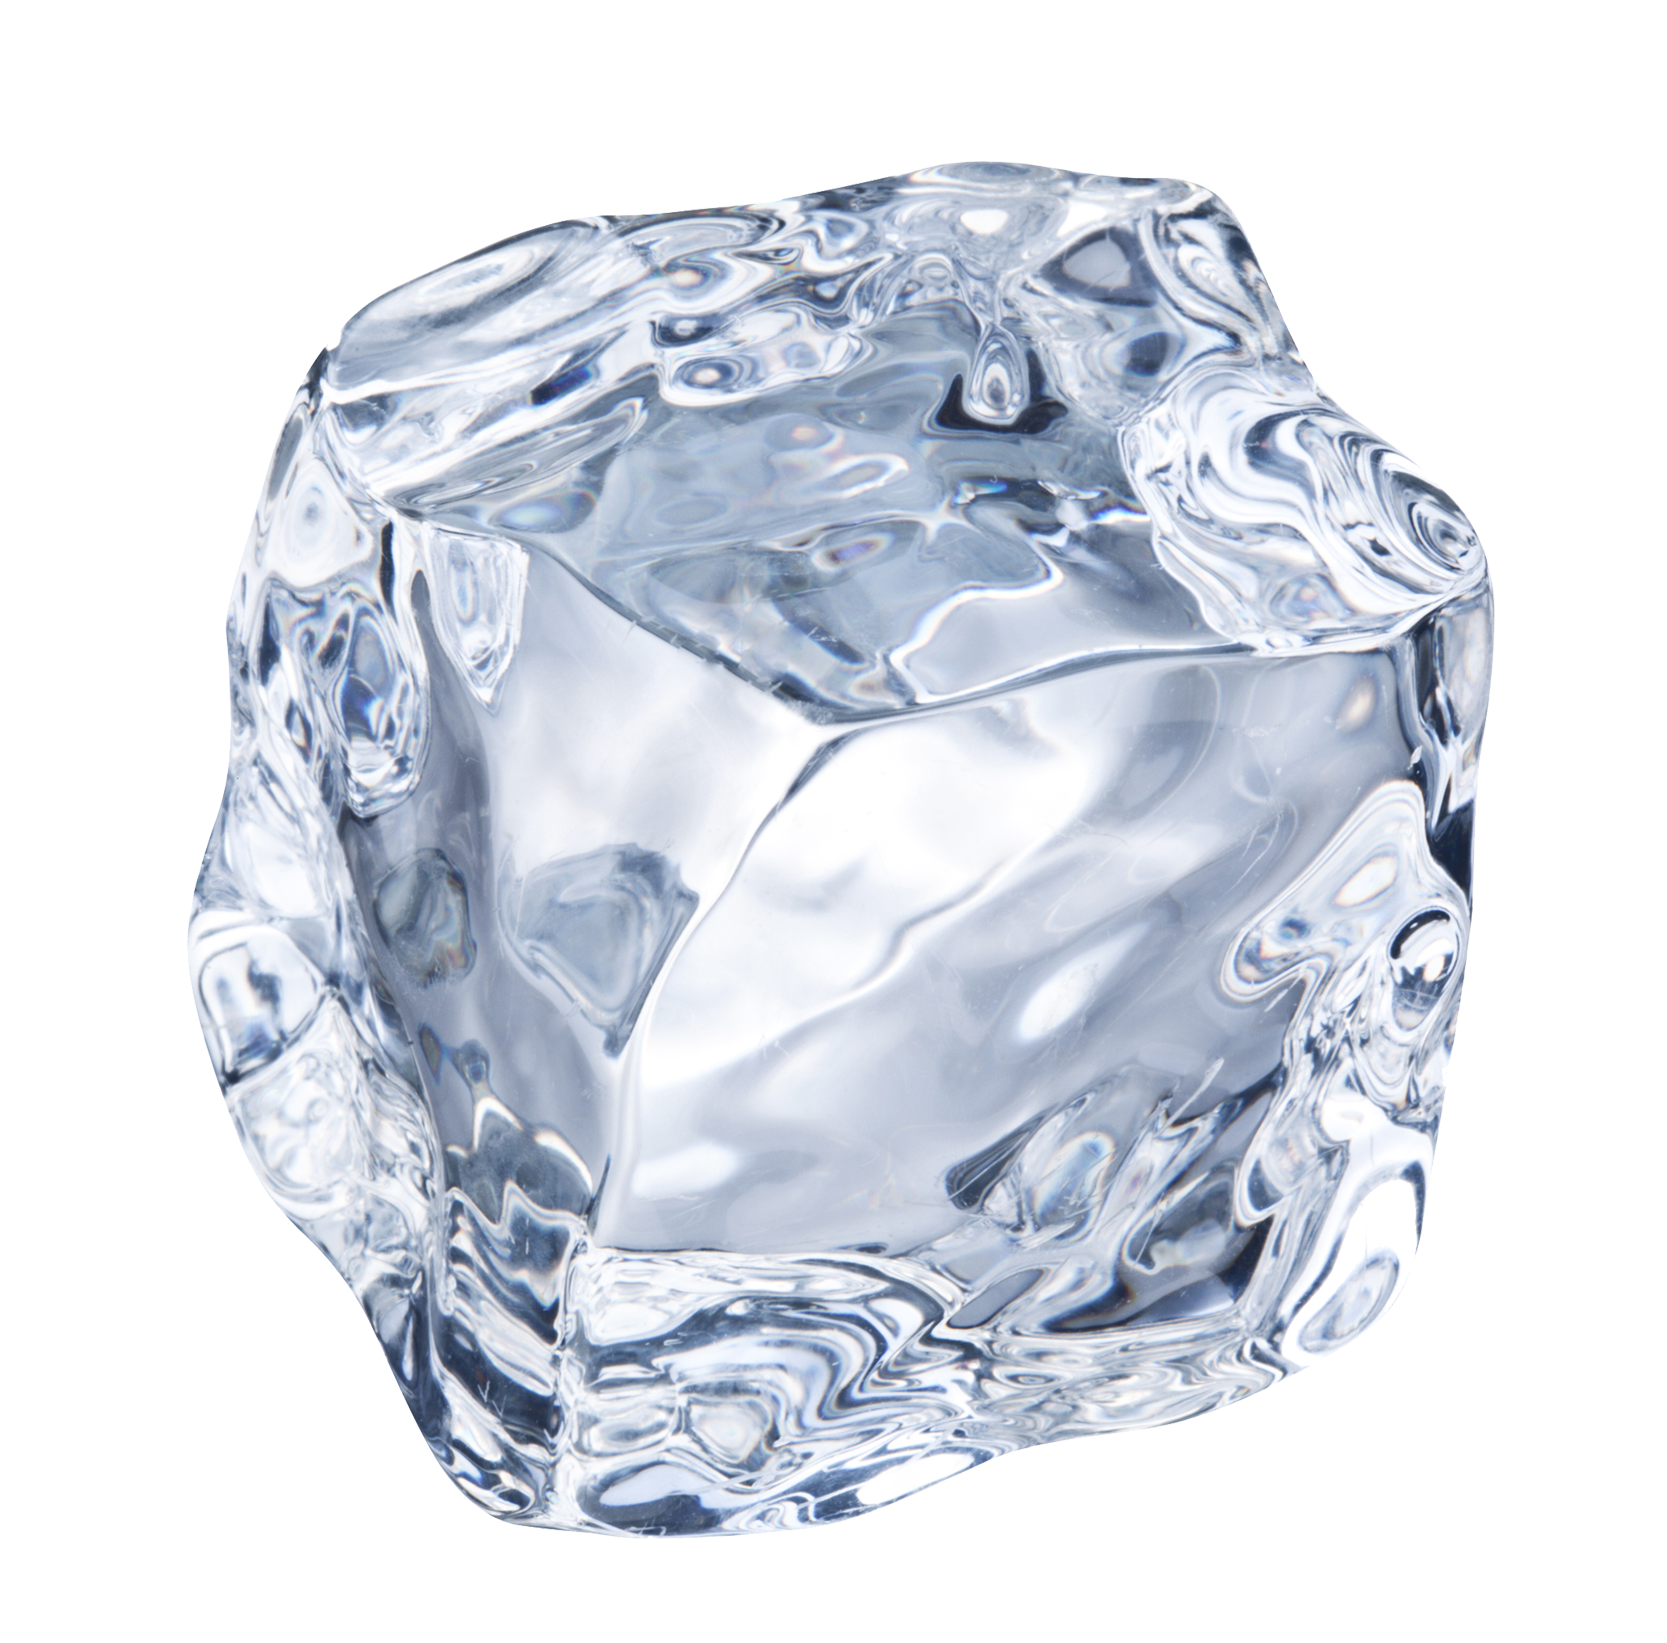 Ice Png Image With Transparent Background Png Arts | Images and Photos ...